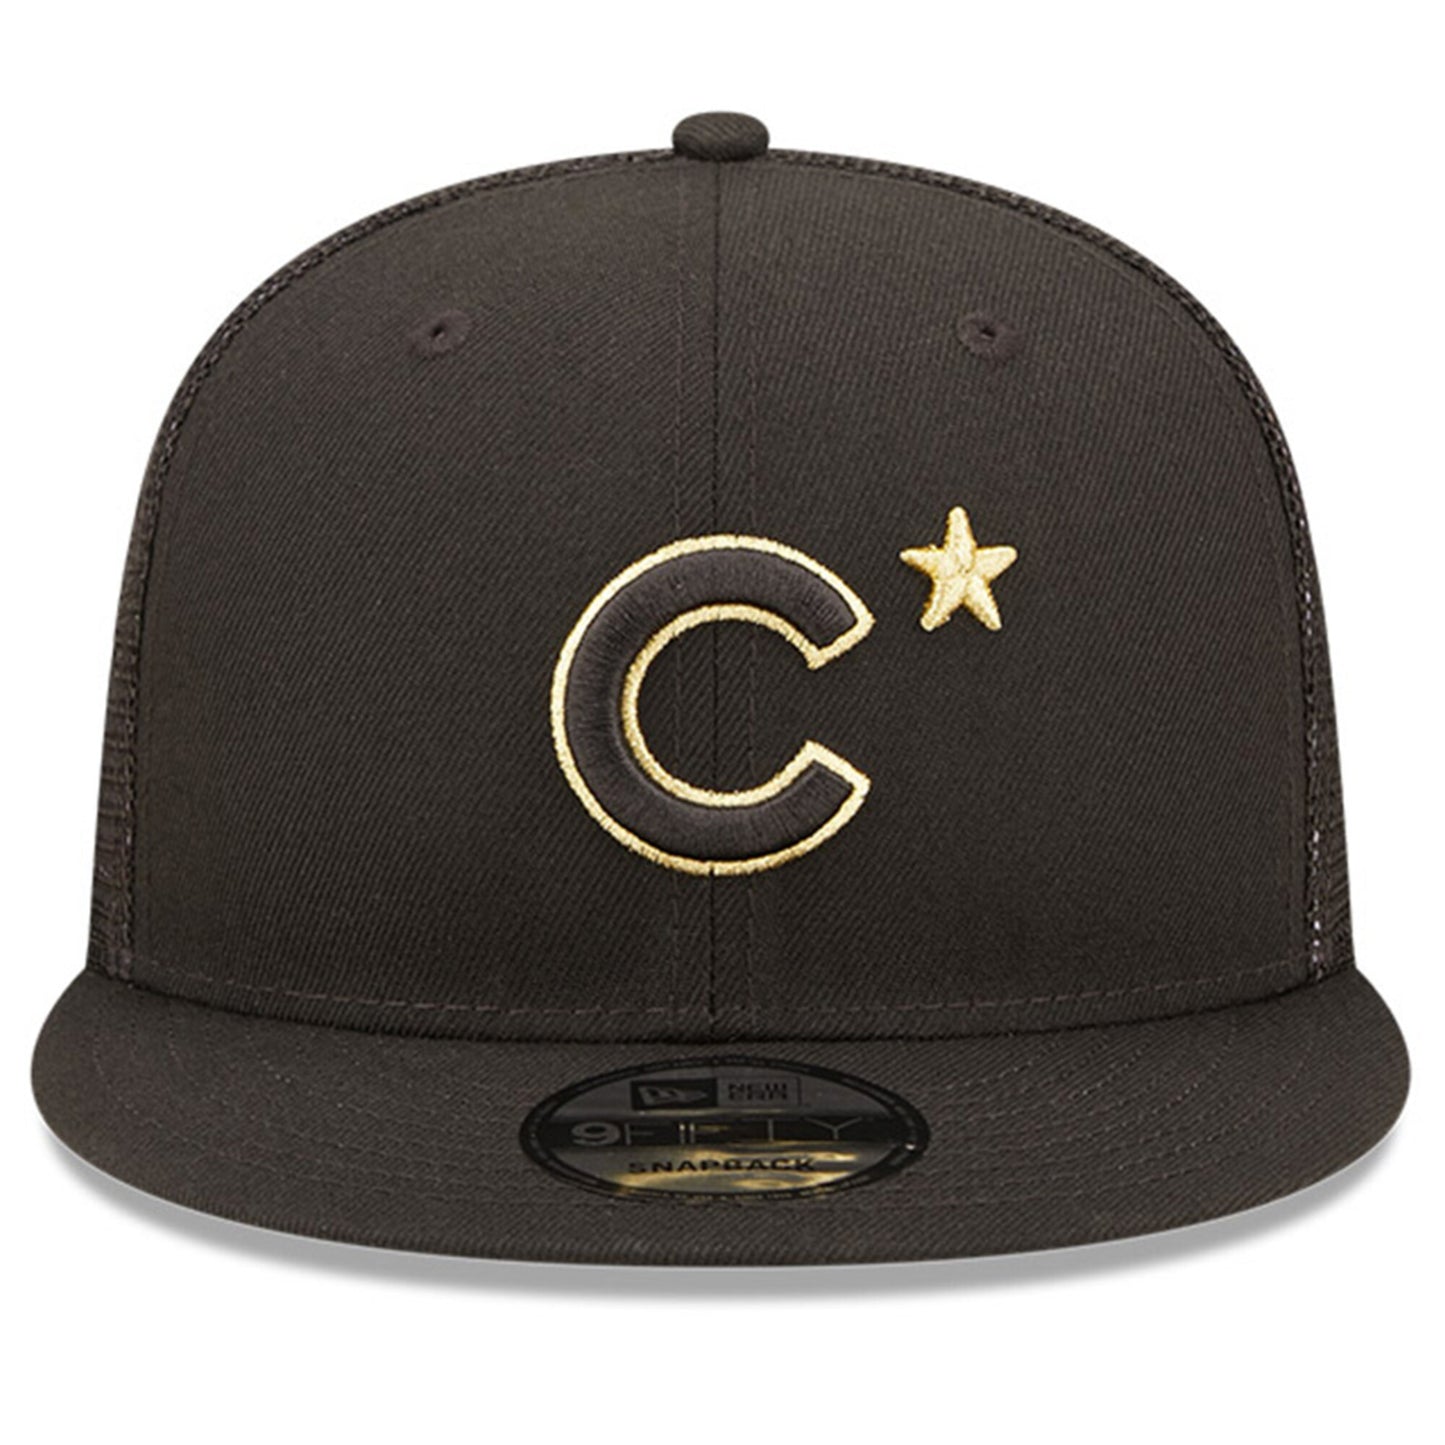 Chicago Cubs New Era 2022 All Star Game Black/Gold 9FIFTY Snapback Adjustable Hat